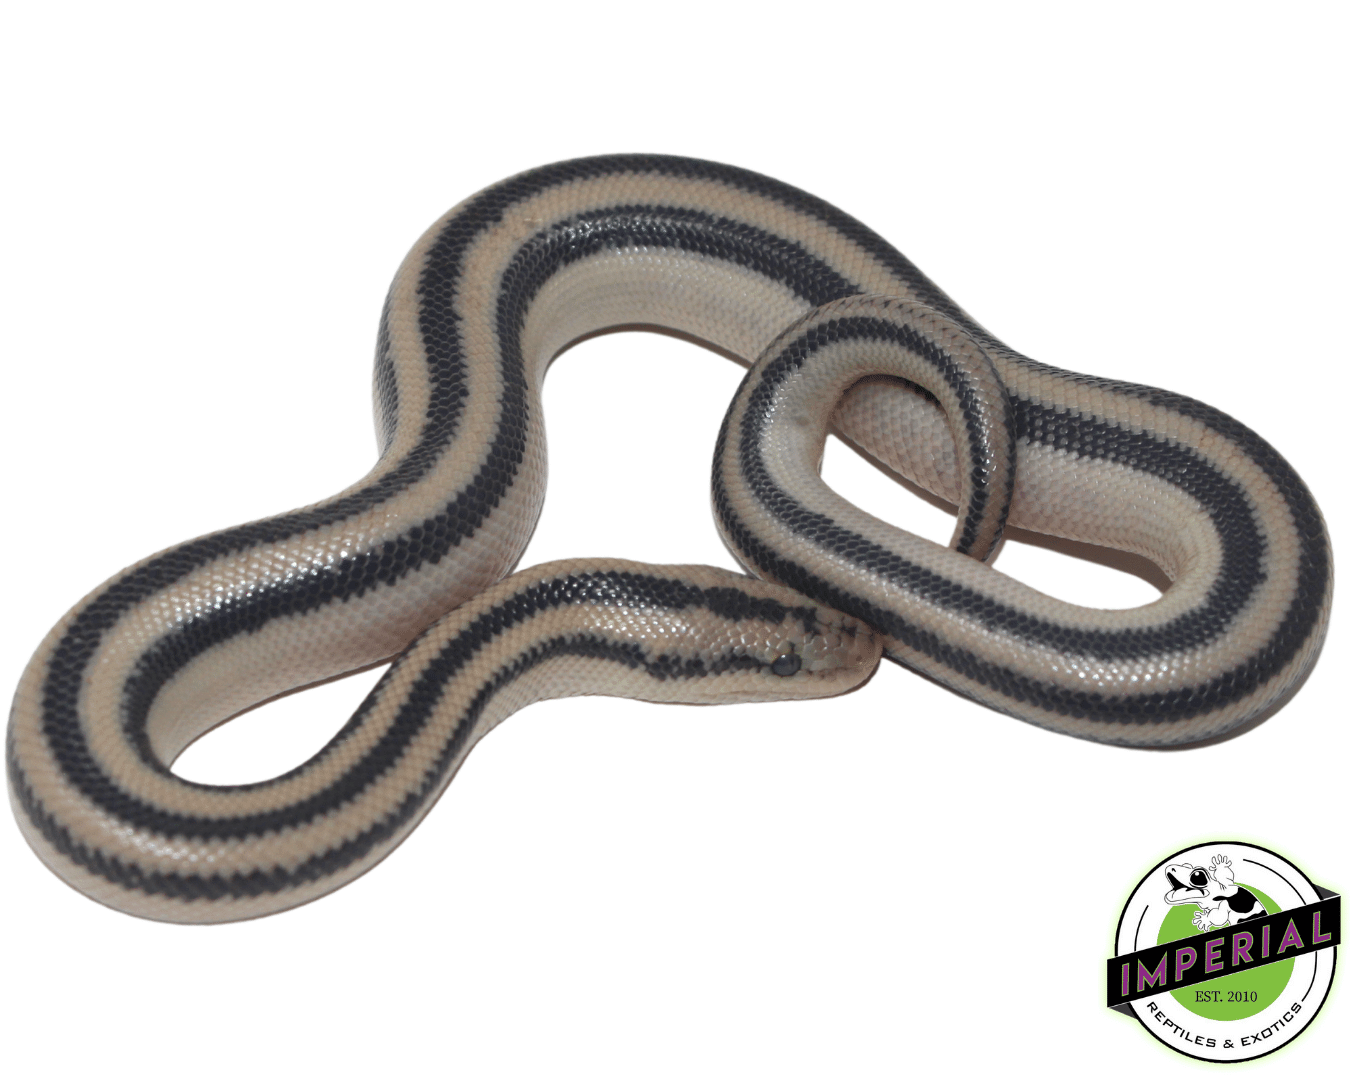 magdalena rosy boa for sale, buy reptiles online at cheap prices